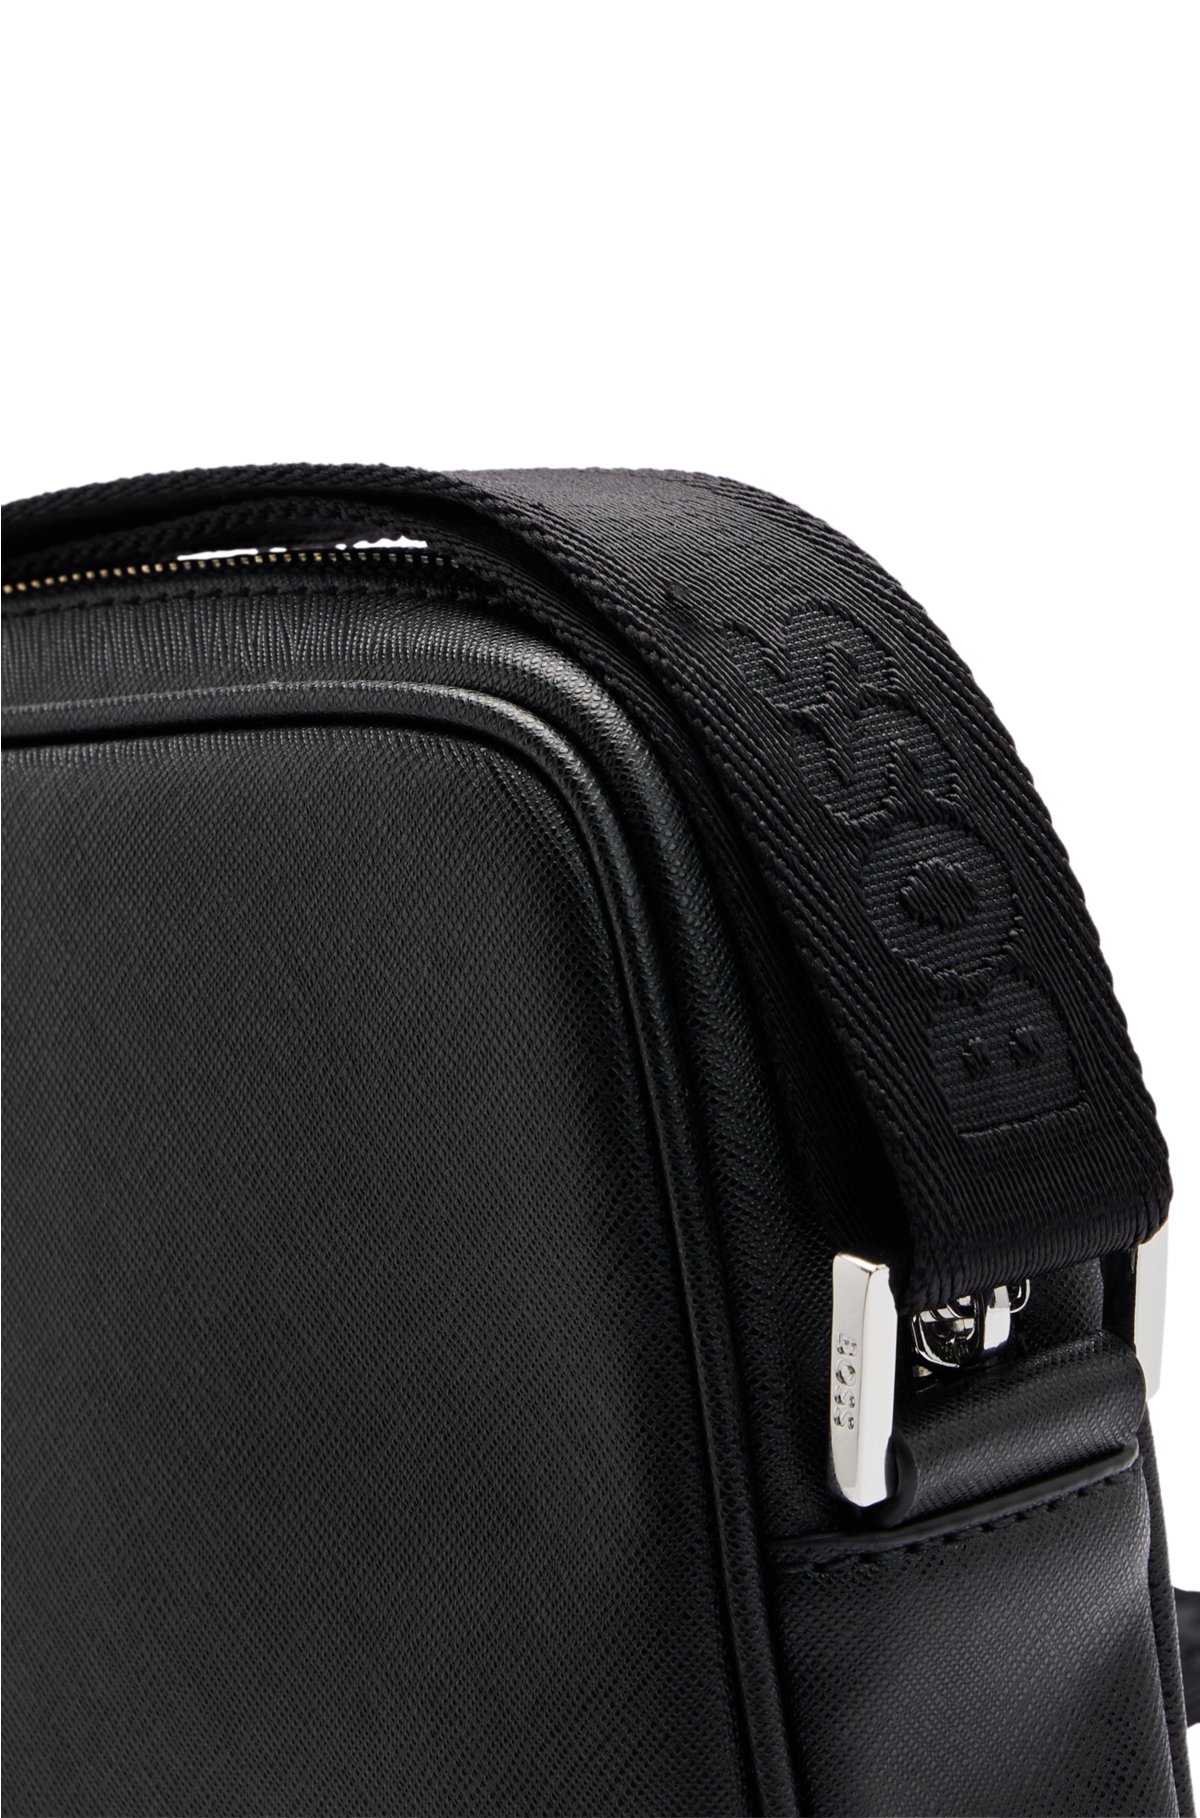 BOSS Reporter signature and logo stripe with bag detail -